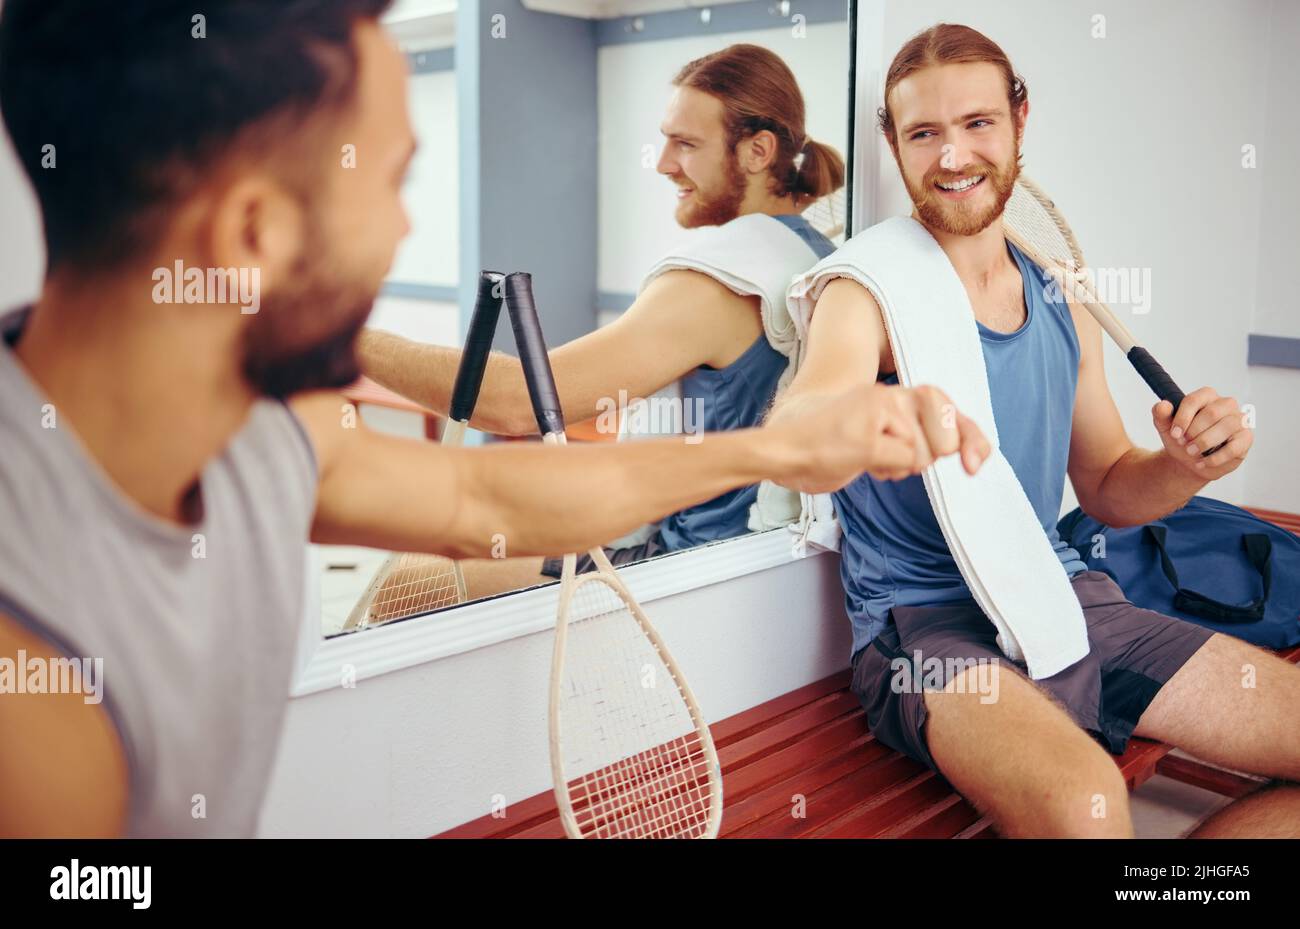 Two squash players giving each other a fist bump. Cheerful friends bonding in a gym locker room. Athletes being social and bonding with each other Stock Photo